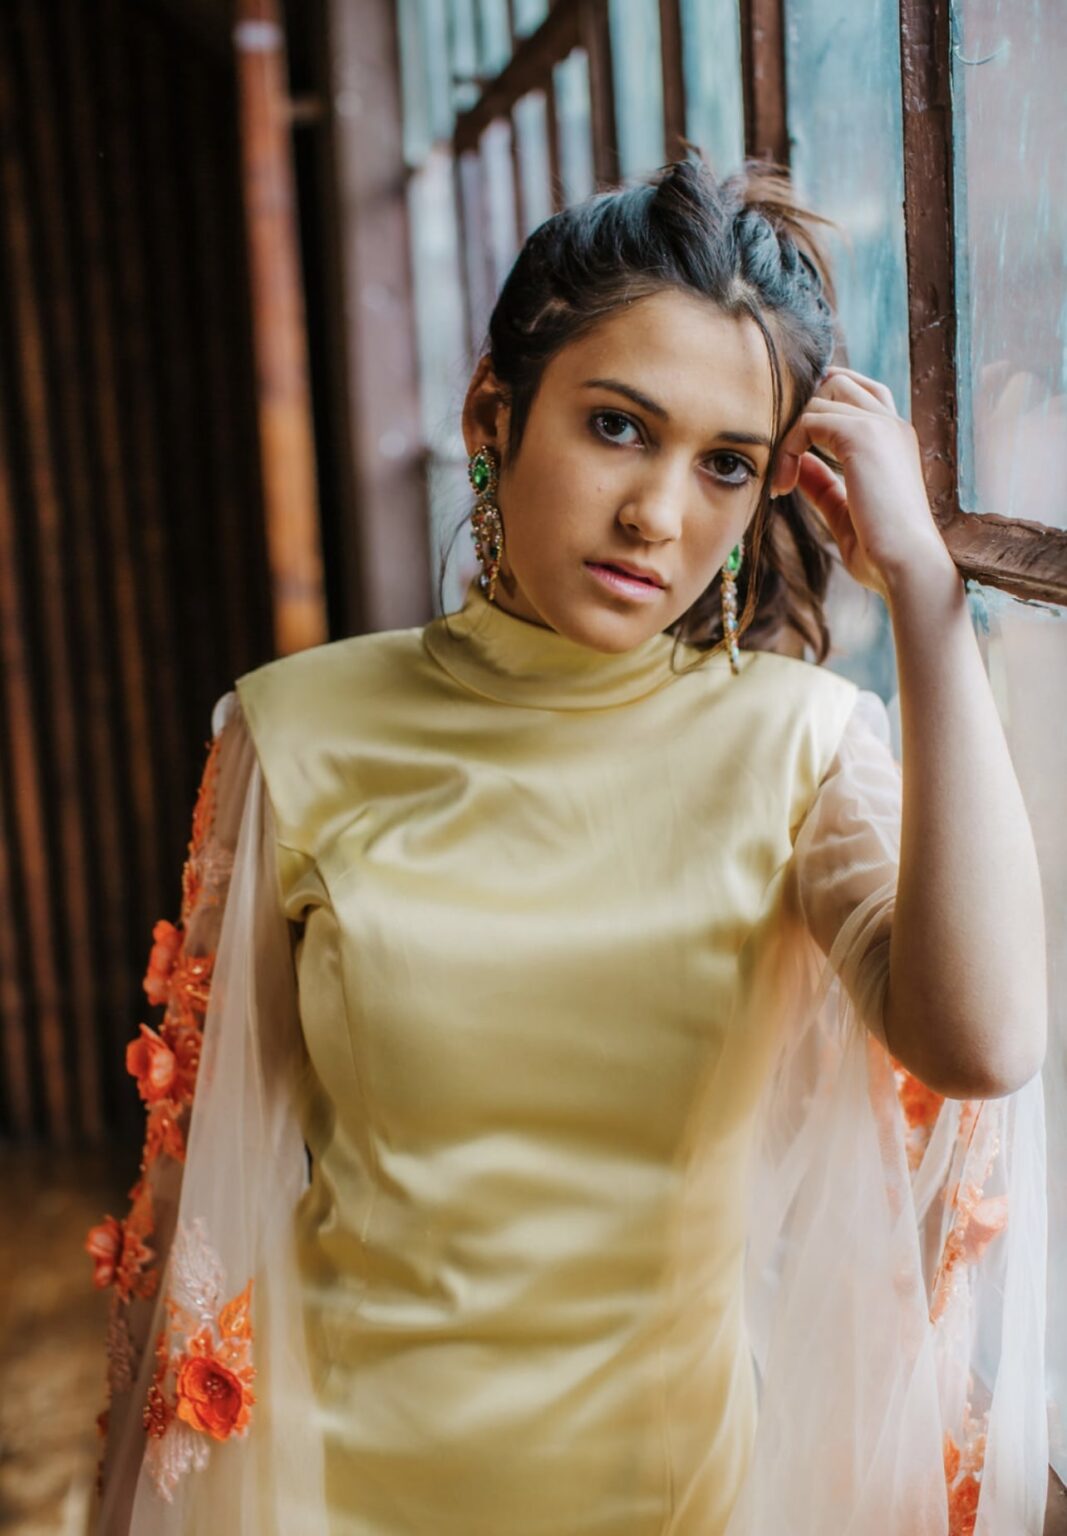 Actress, singer, and model Zoe Grace Rodriguez has been keeping herself busy why the world slowed down these past few years. Check out her work today.